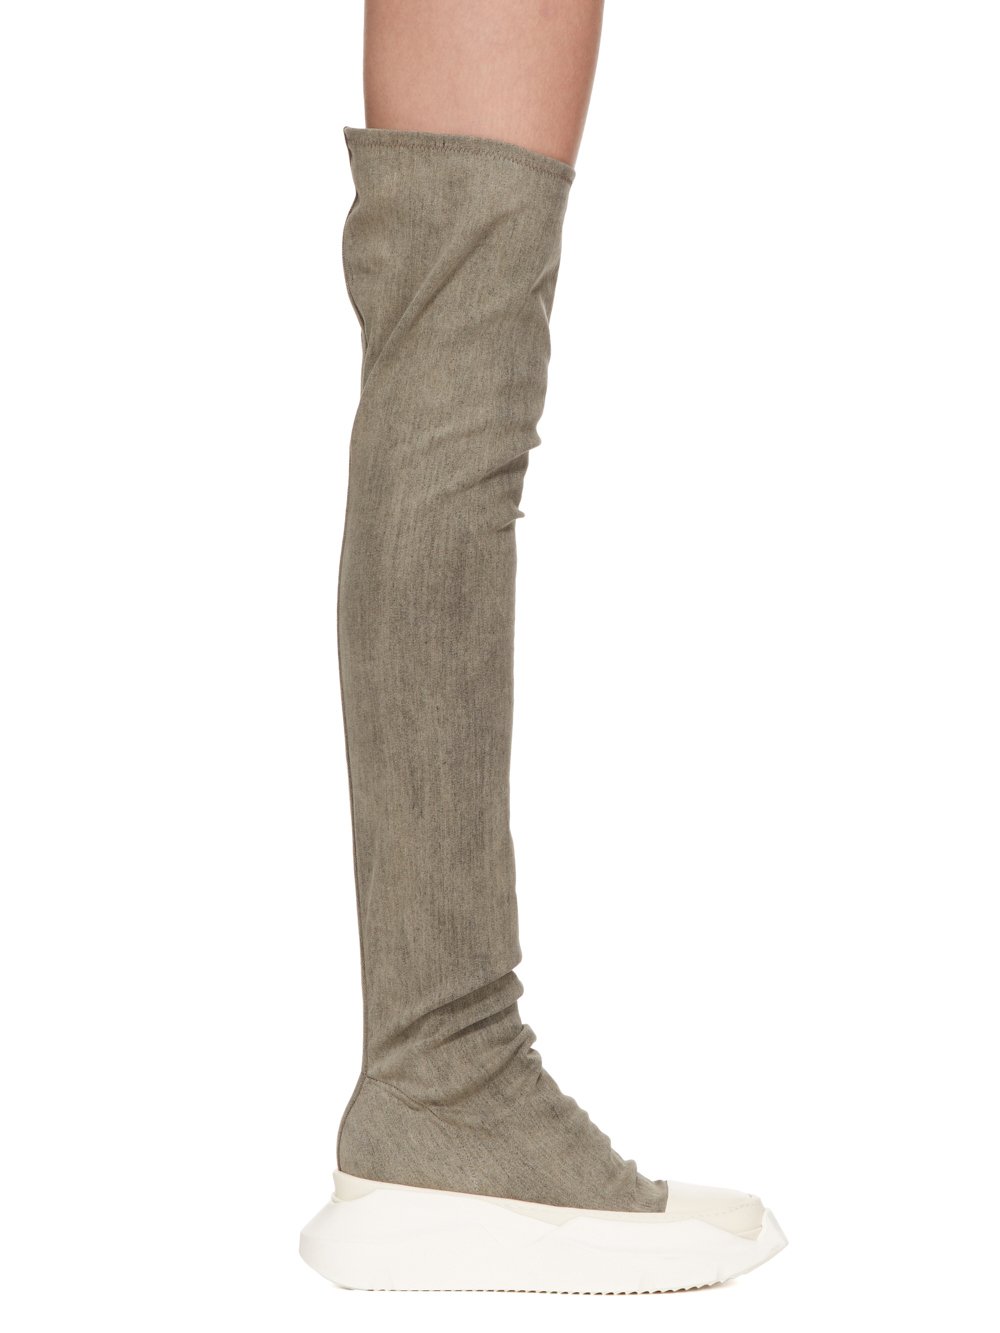 RICK OWENS FW23 LUXOR ABSTRACT STOCKINGS IN MINERAL PEARL STRETCH DENIM